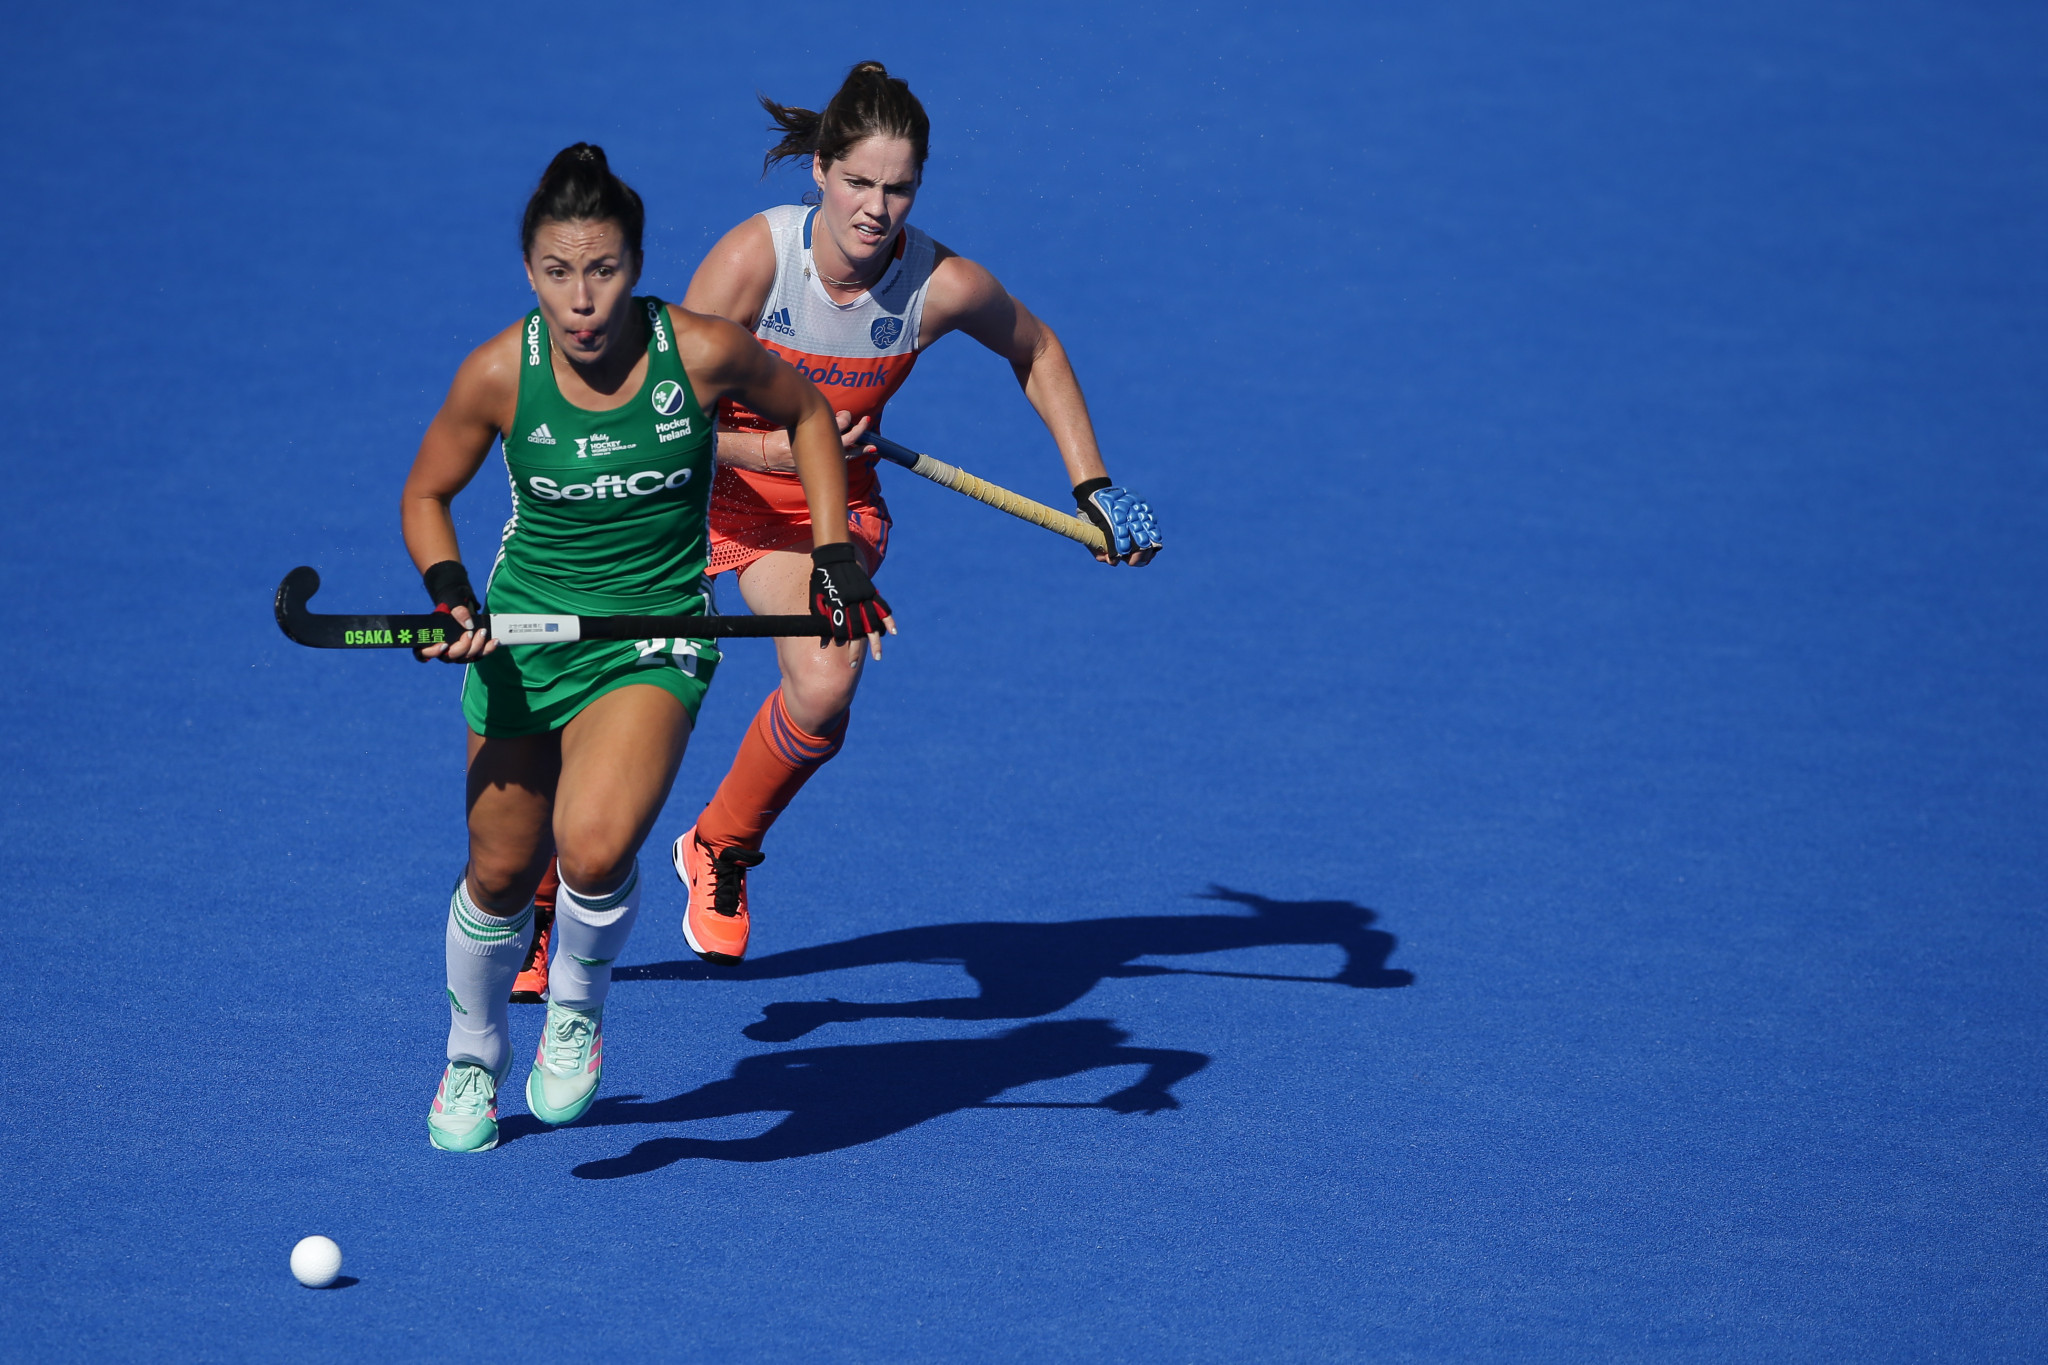 Ireland's women provided a fairytale story at the Hockey World Cup ©Getty Images